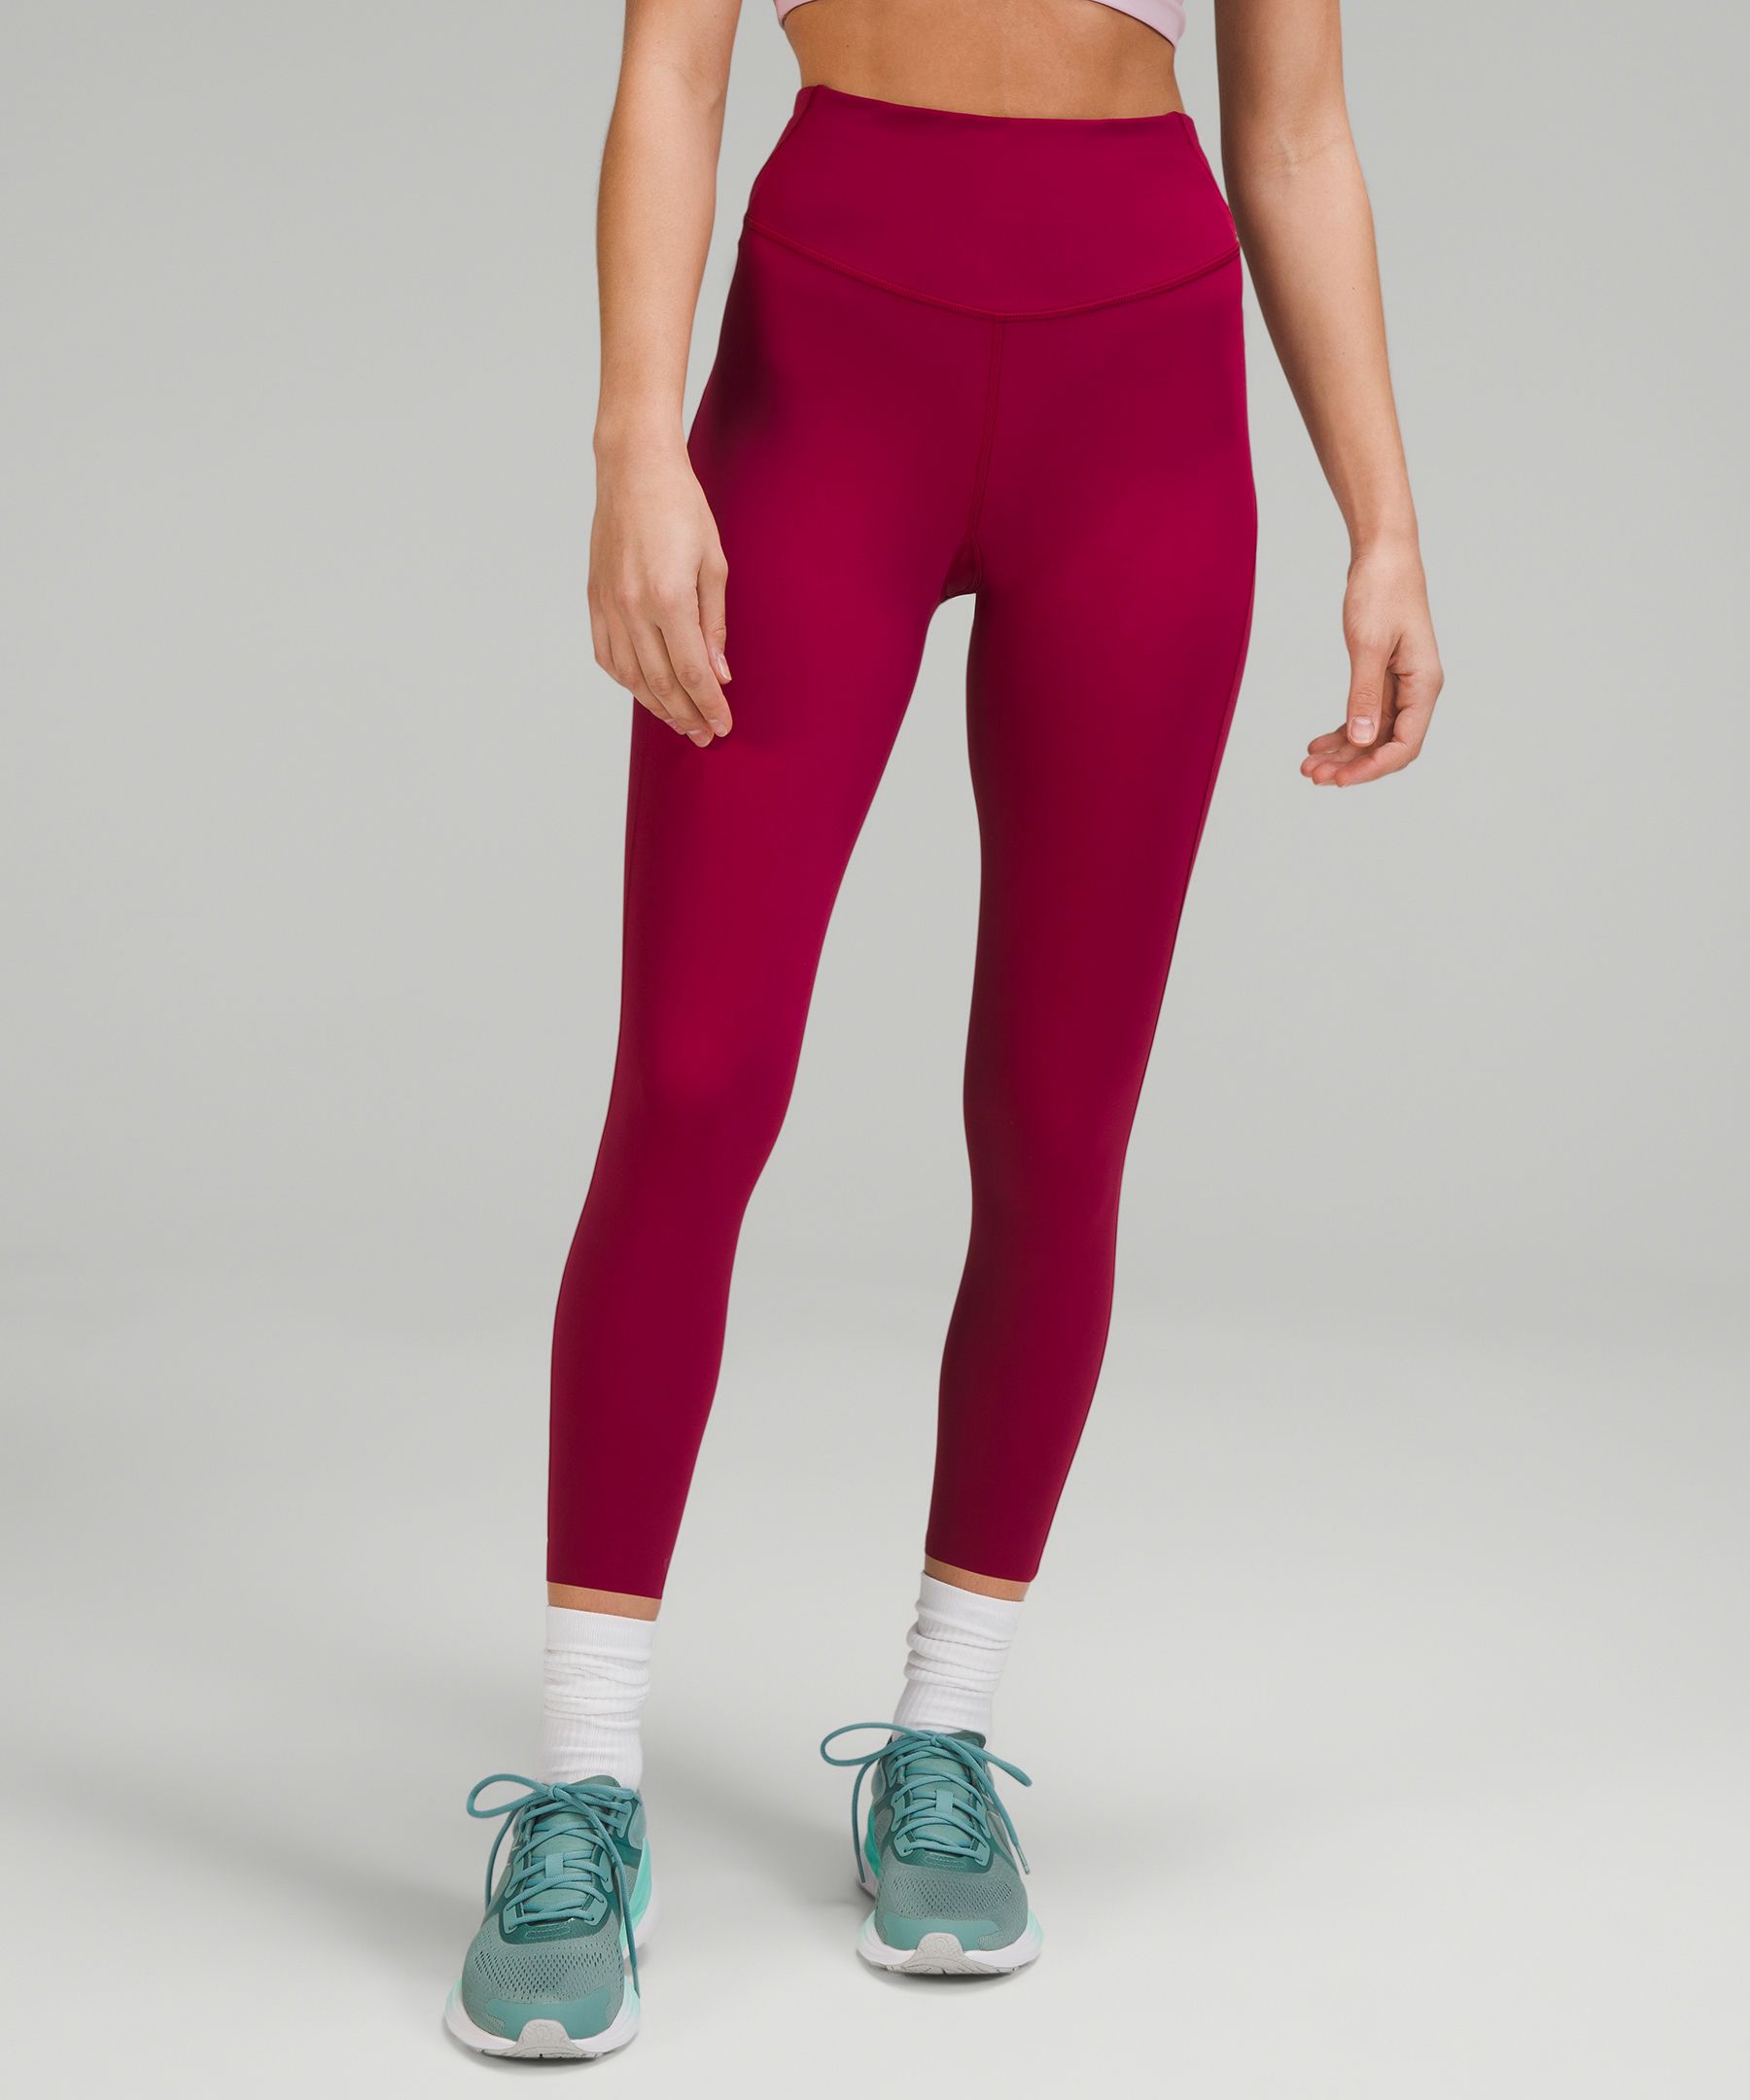 BEST LULULEMON LEGGING REVIEW / BASE PACE HIGH RISE TIGHT 